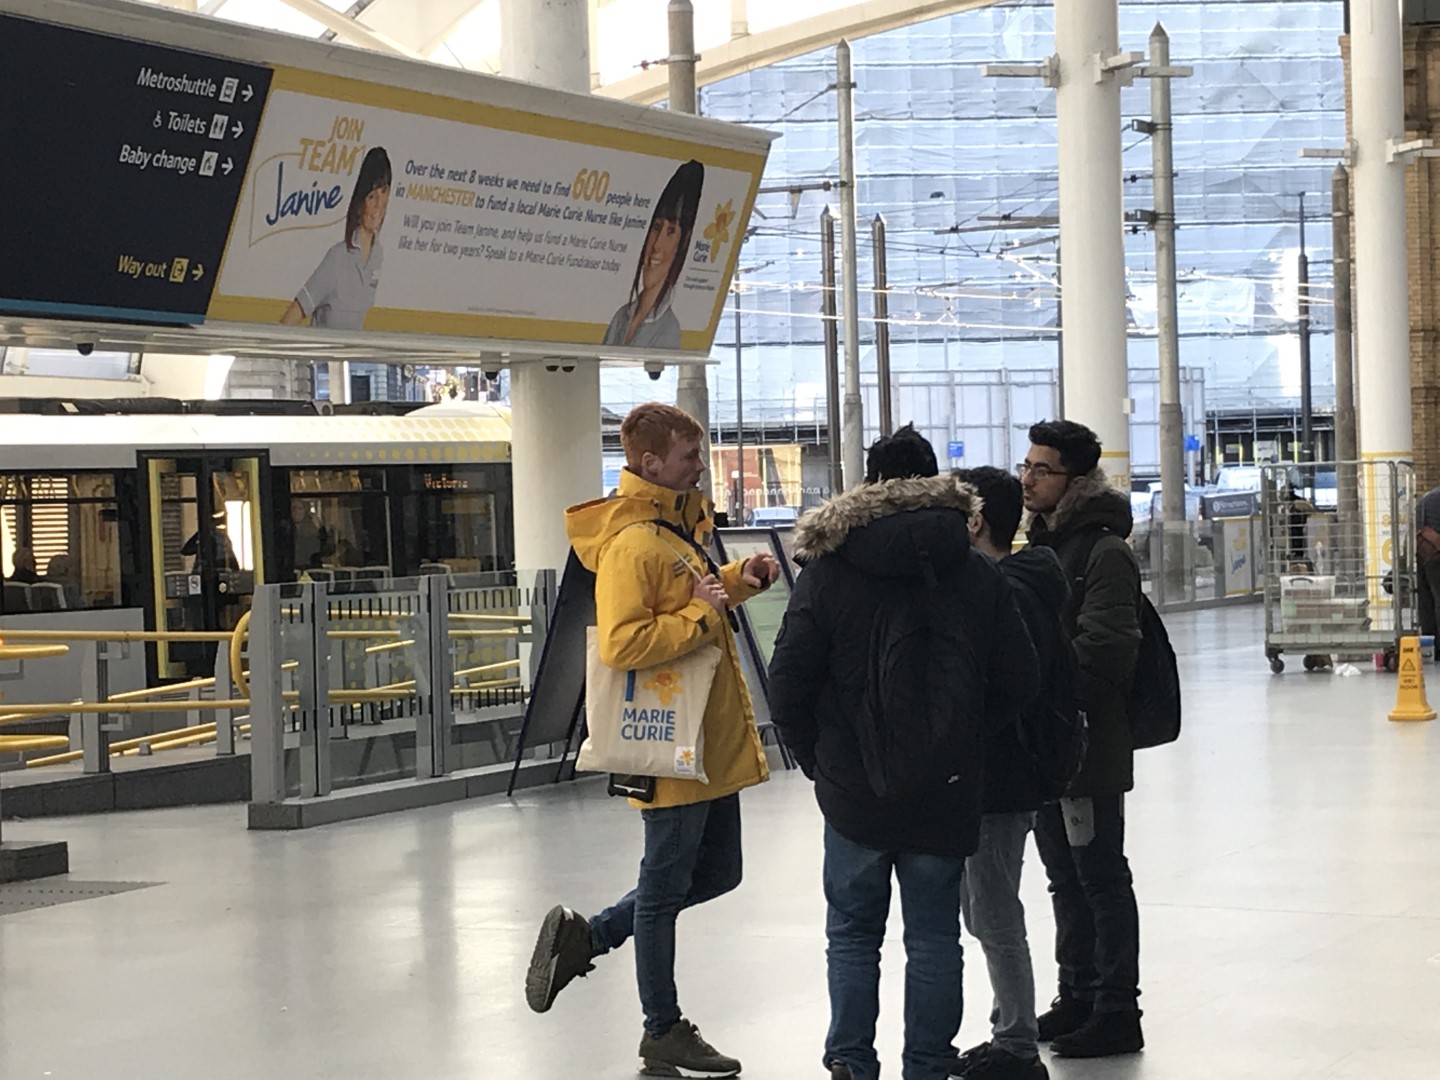 Experiential advertising with banners, staff and giveaways at railway stations